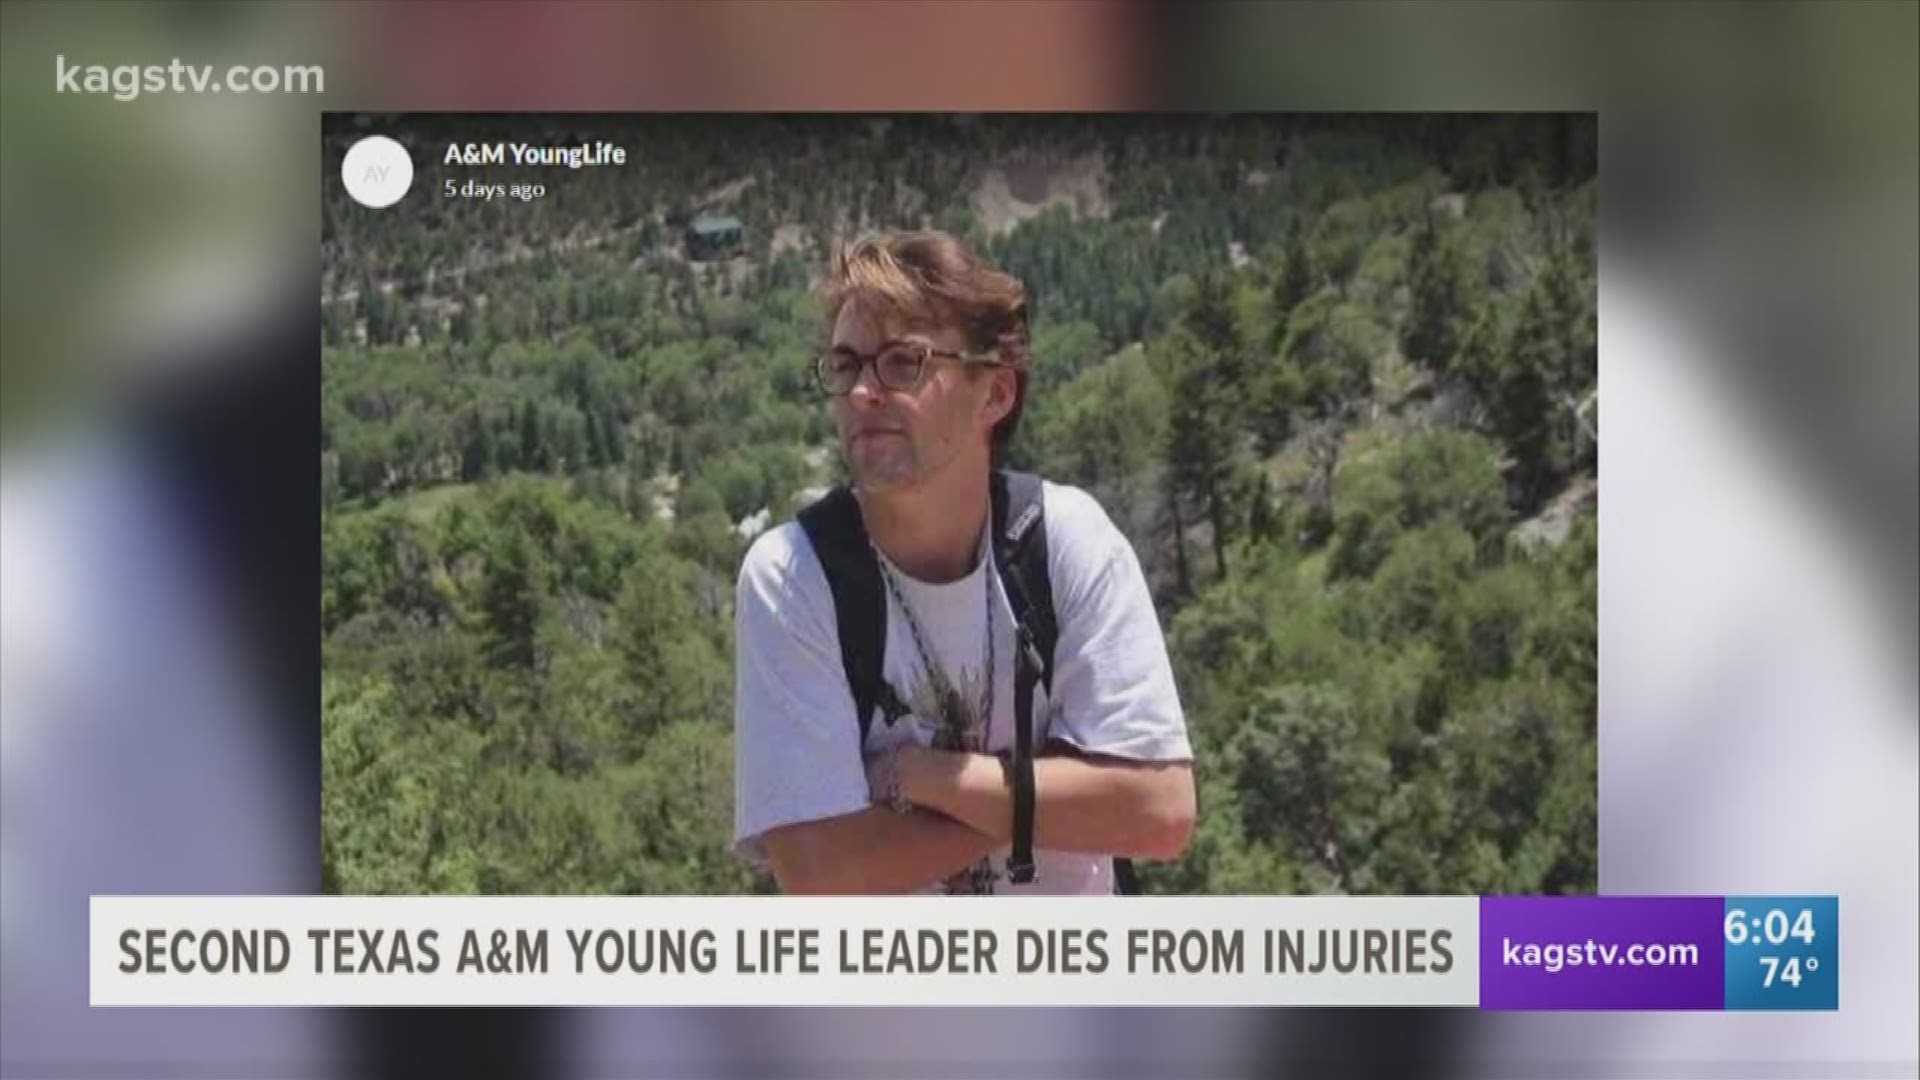 Another student has passed away due to injuries sustained in a crash two weeks ago. Blake Rodgers, one of the Brazos Valley Young Life leaders who was on his way to a Young Life camp in Colorado, was in critical condition following the accident but passed